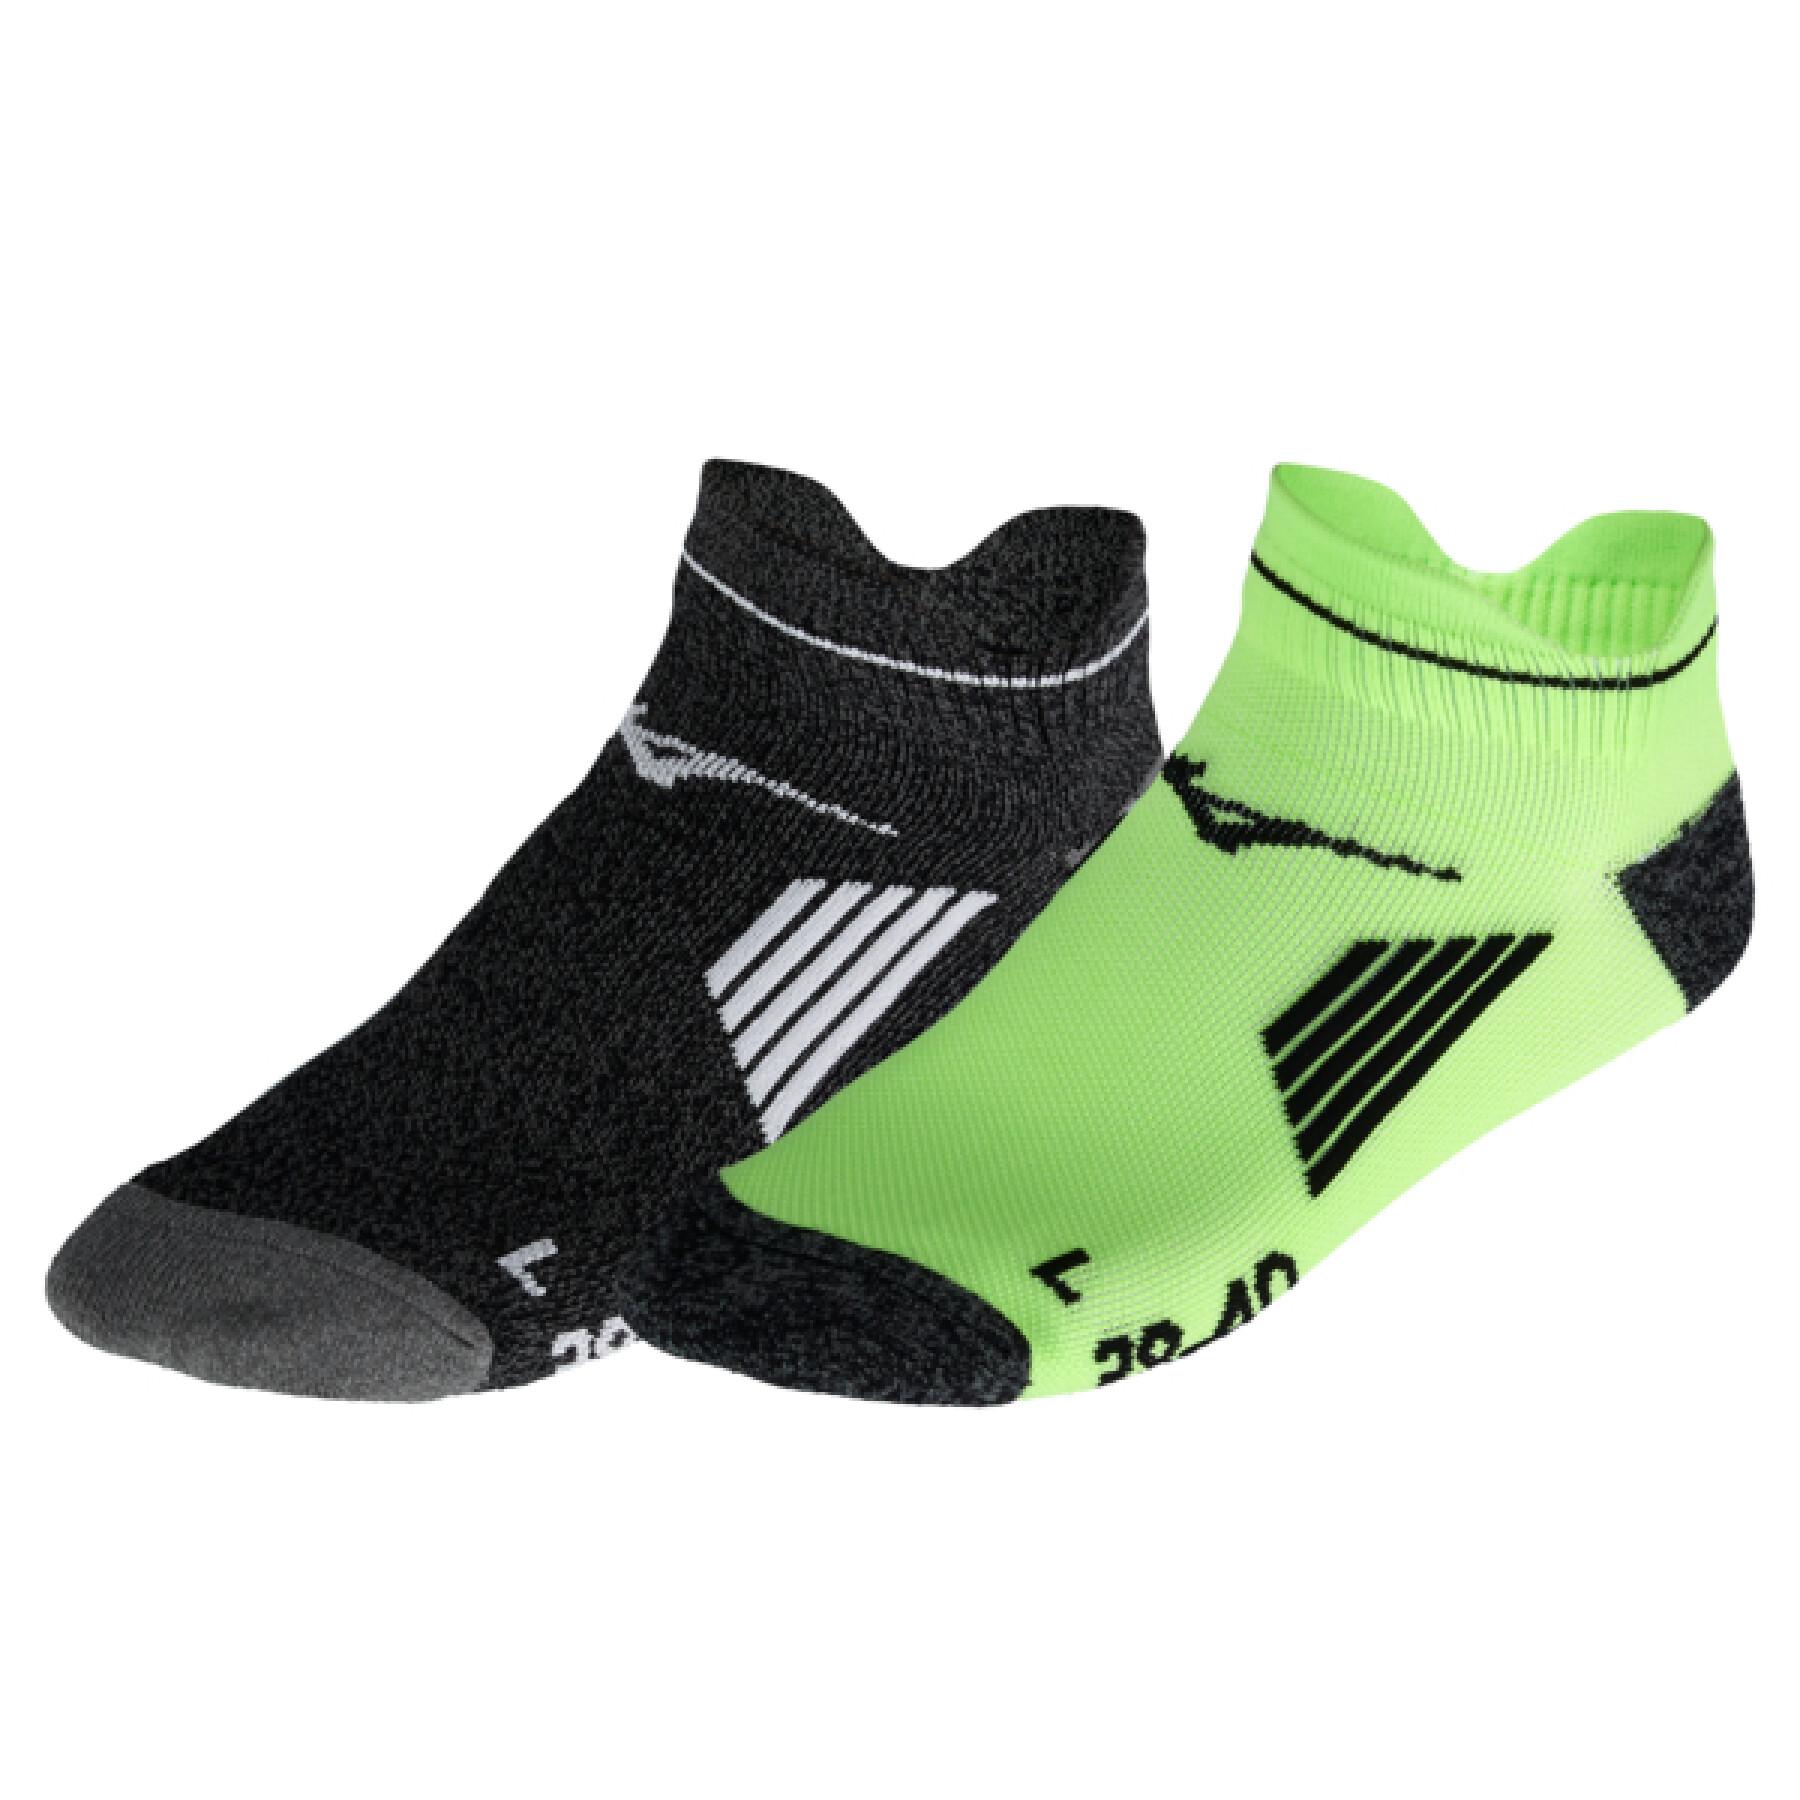 Set of 2 pairs of socks Mizuno Active TR Mid (6 pack)